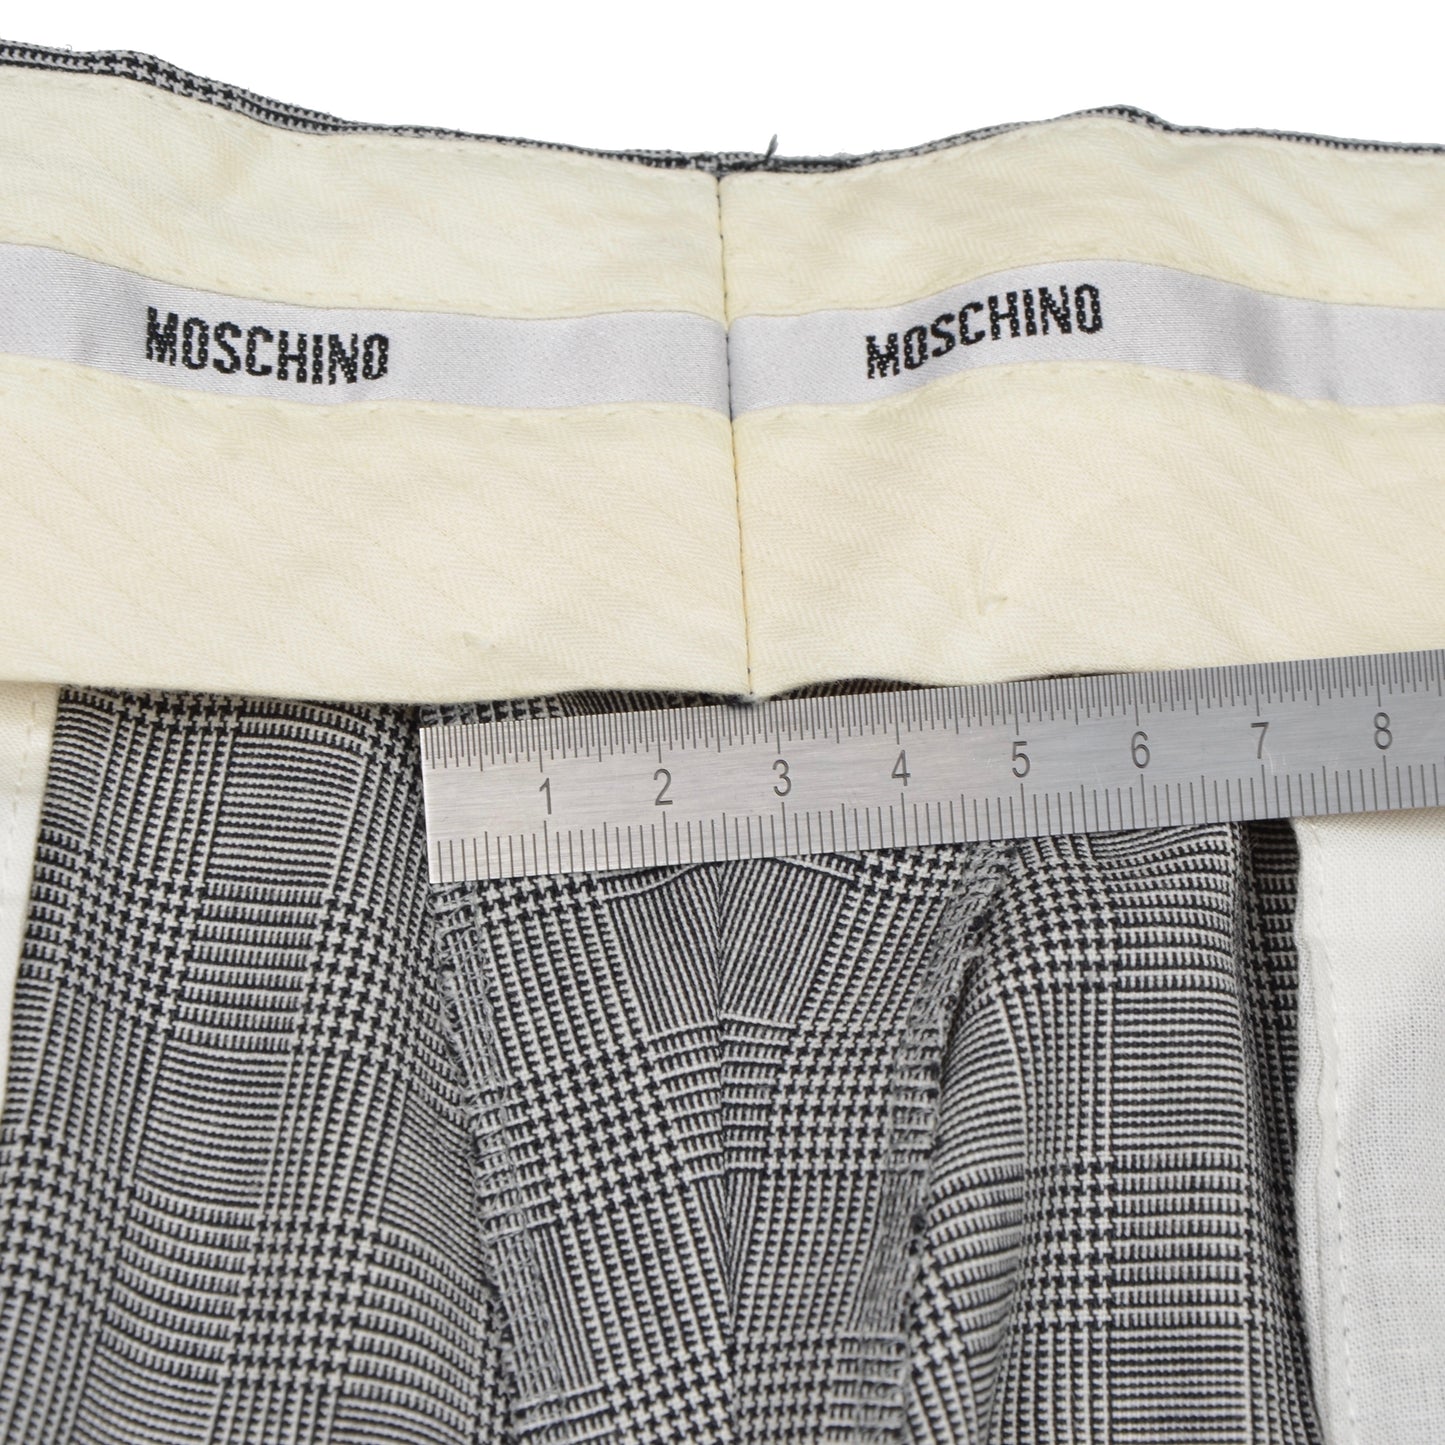 Moschino Tailored Wool Blend Suit Size 50 - Prince of Wales